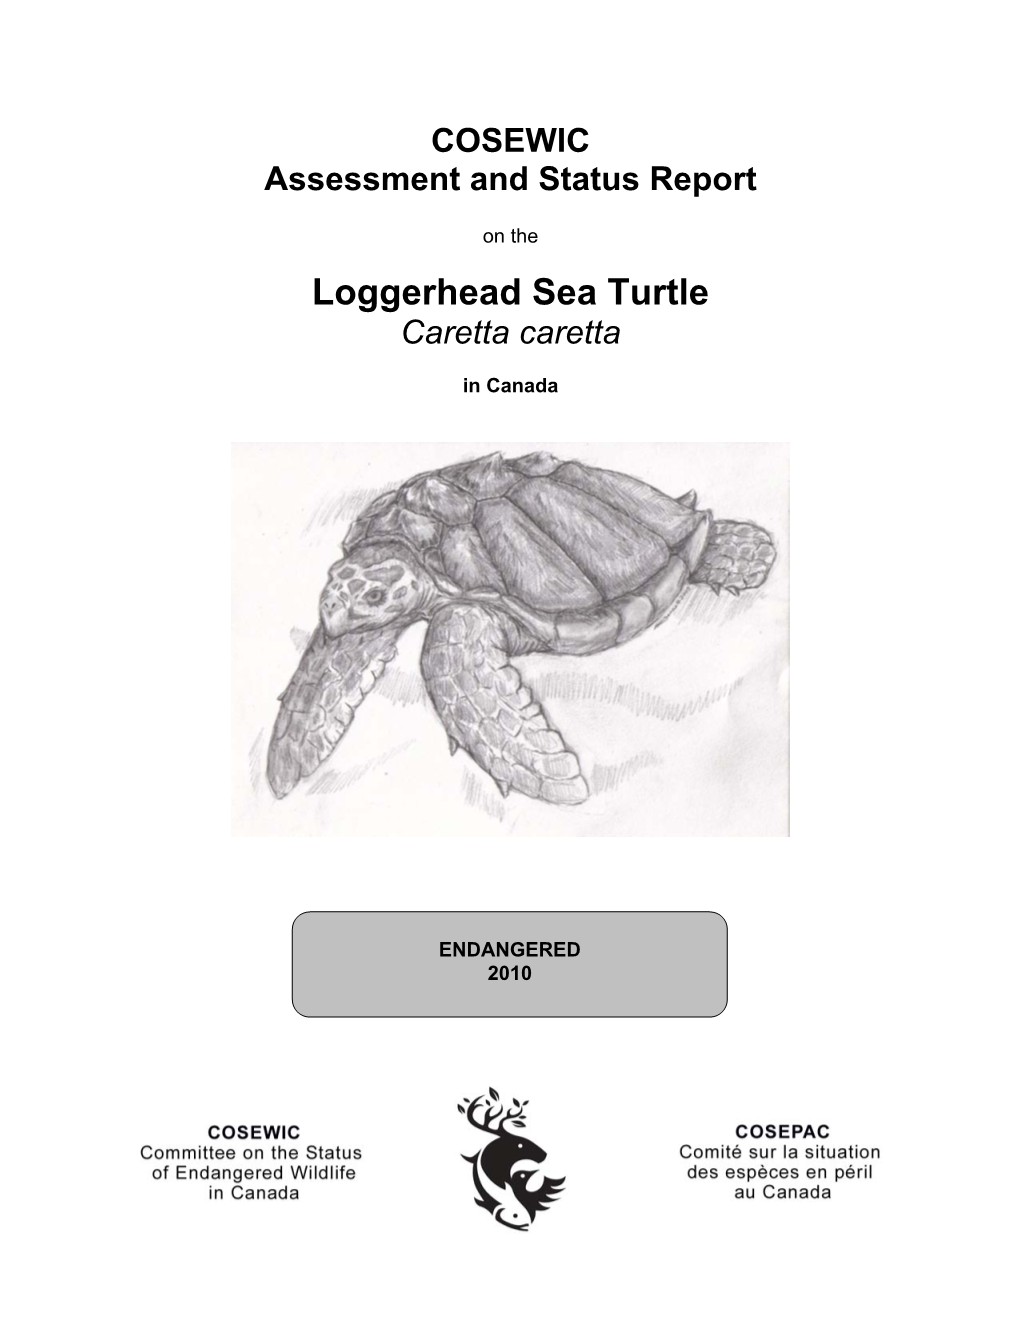 Loggerhead Sea Turtle (Caretta Caretta) Is One of Six Species of Hard-Shelled Marine Turtles That Comprise the Family Cheloniidae in the Order Testudines